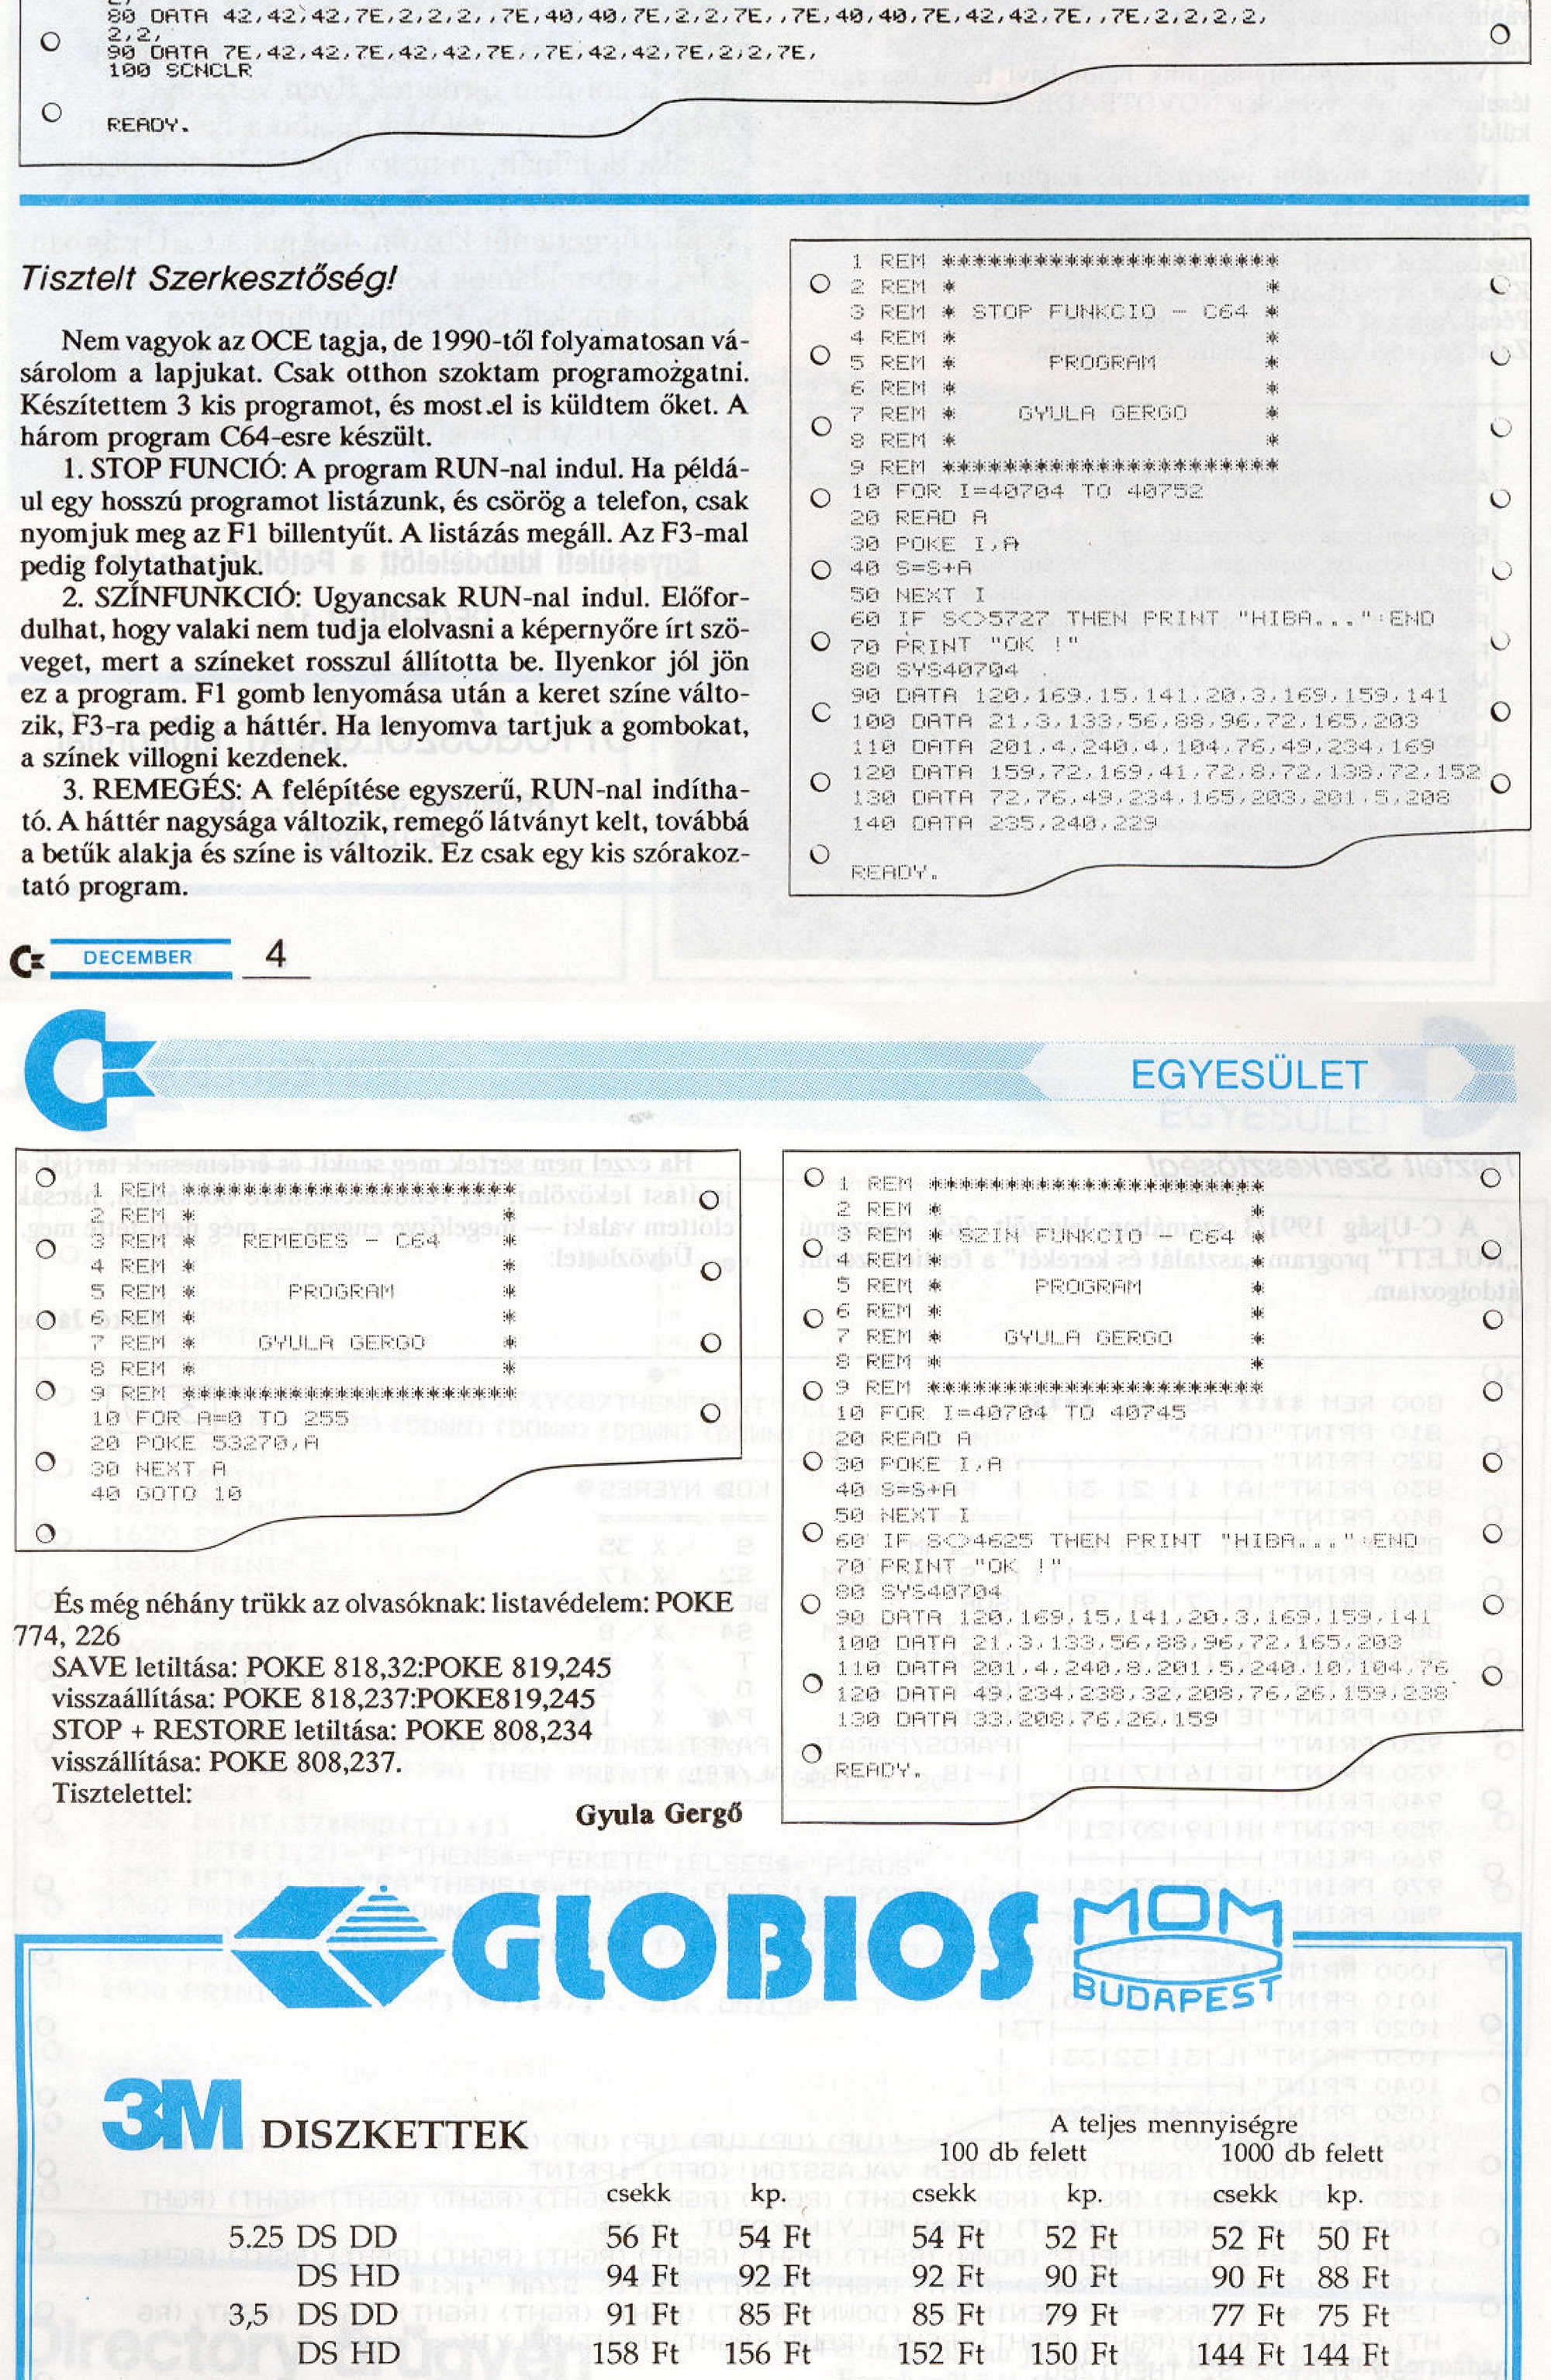 Commodore Magazine 1991/12., pages 4-5.